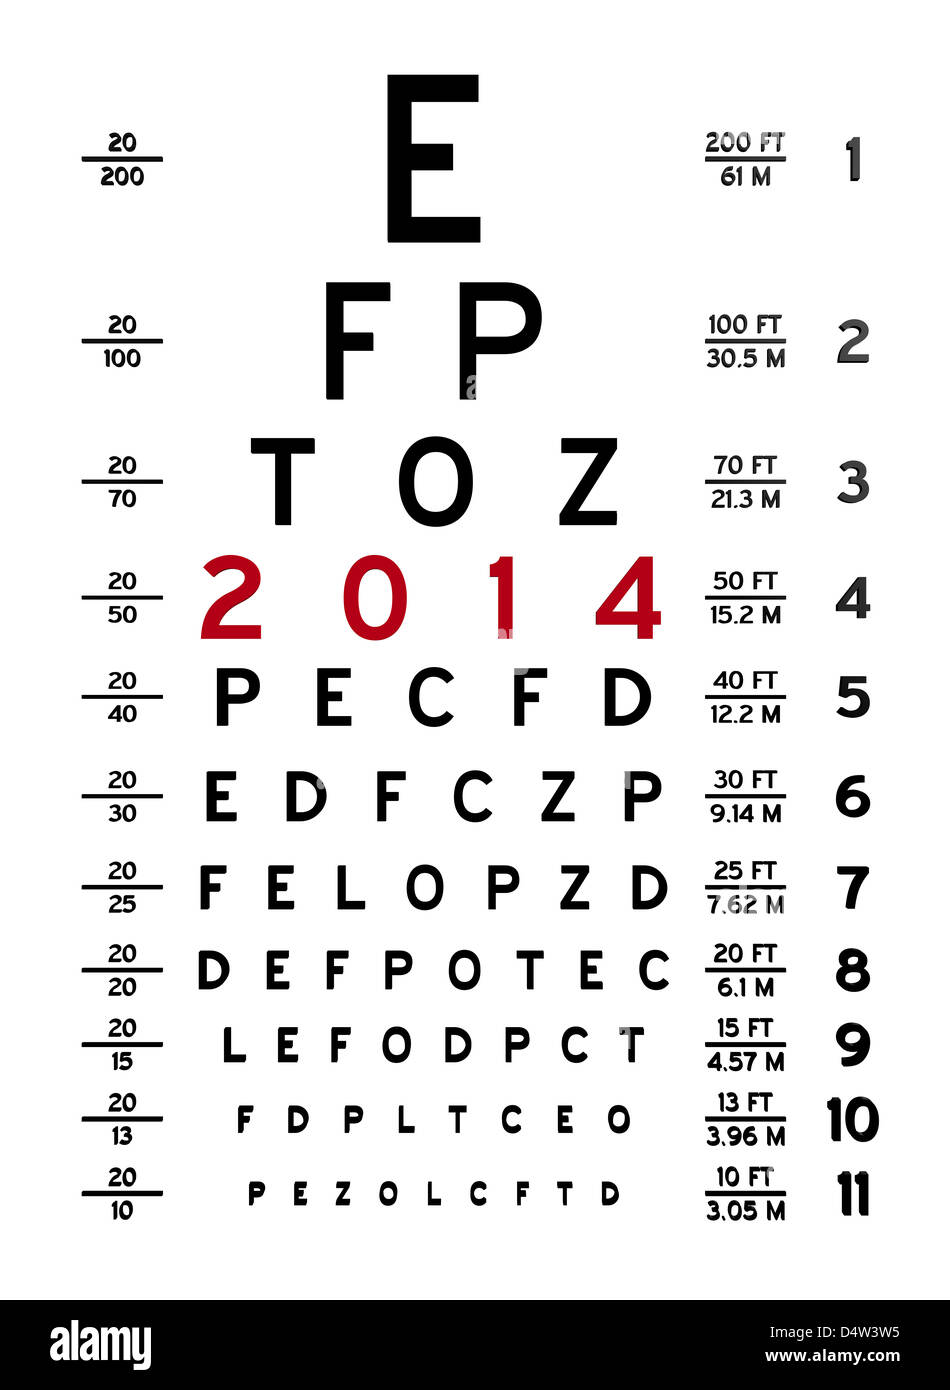 Abstract eye chart background design isolated on white Stock Photo - Alamy